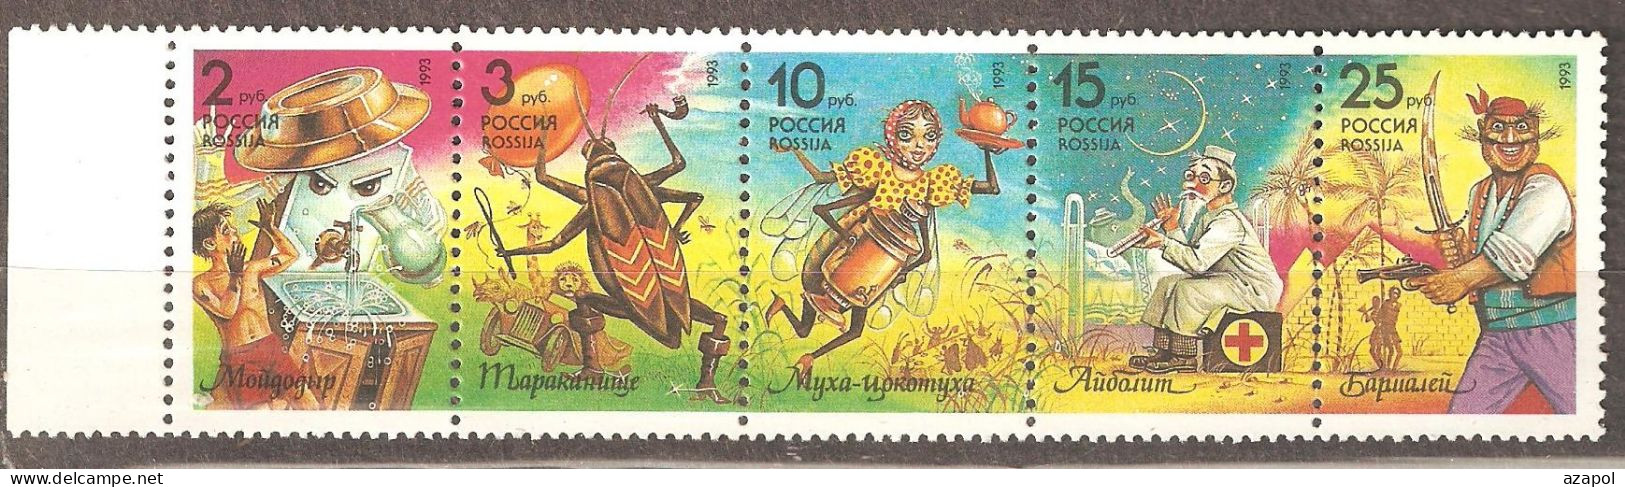 Fairy Tales: 2 Full Sets Of 4 + 5 Mint Stamps, Russia, 1992-3, Mi#234-237, 289-93, MNH - Fairy Tales, Popular Stories & Legends